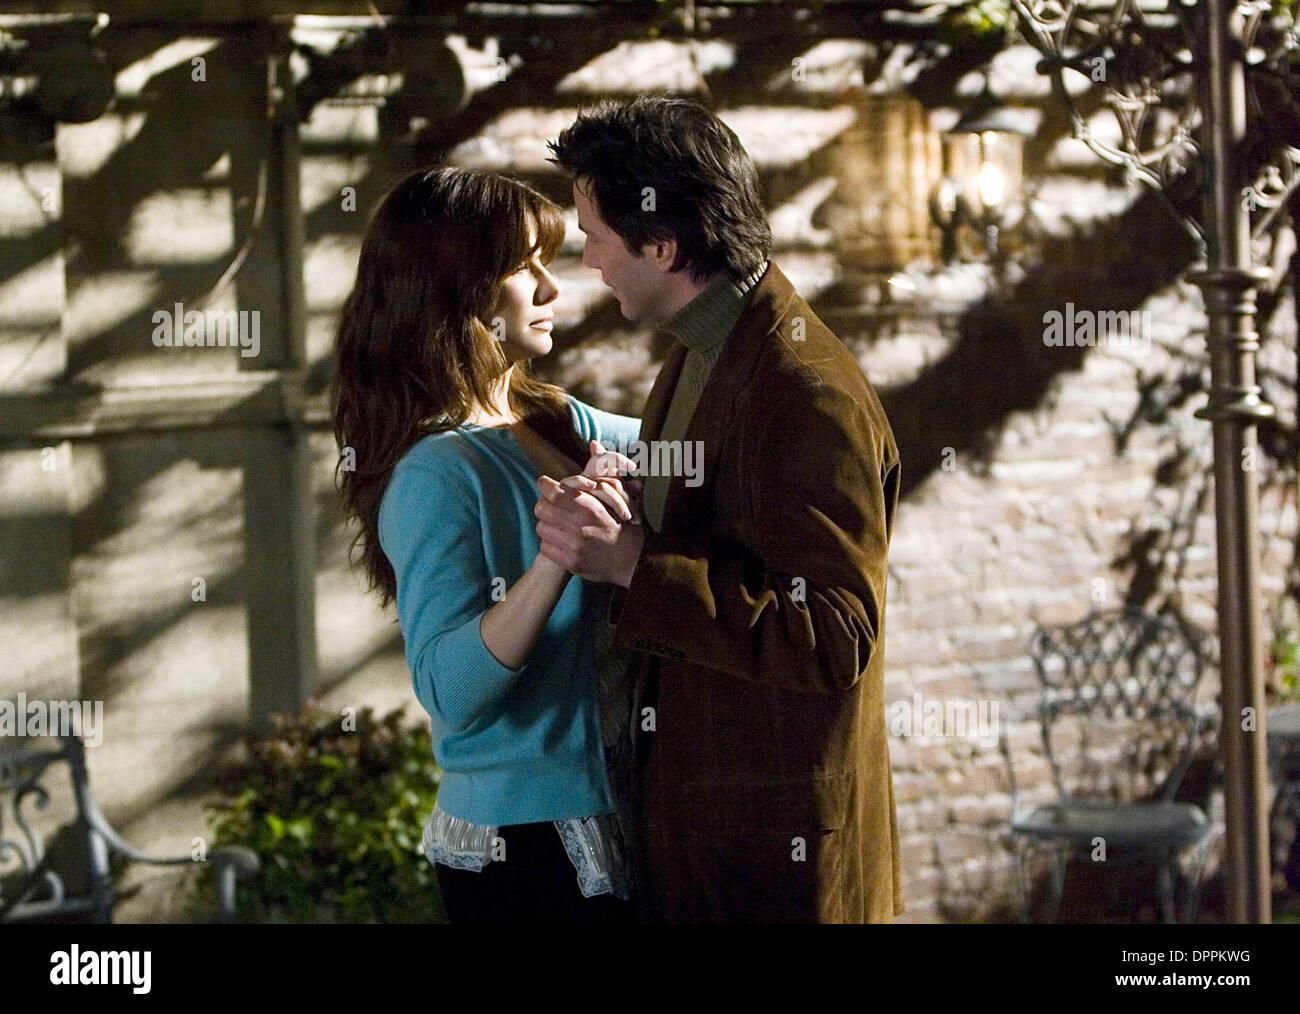 May 22, 2006 - SANDRA BULLOCK stars as Kate Forster and KEANU REEVES stars as Alex Wyler in Warner Bros. Pictures' and Village Roadshow Pictures' romantic drama ''The House.''. .K49221ES.TV-FILM